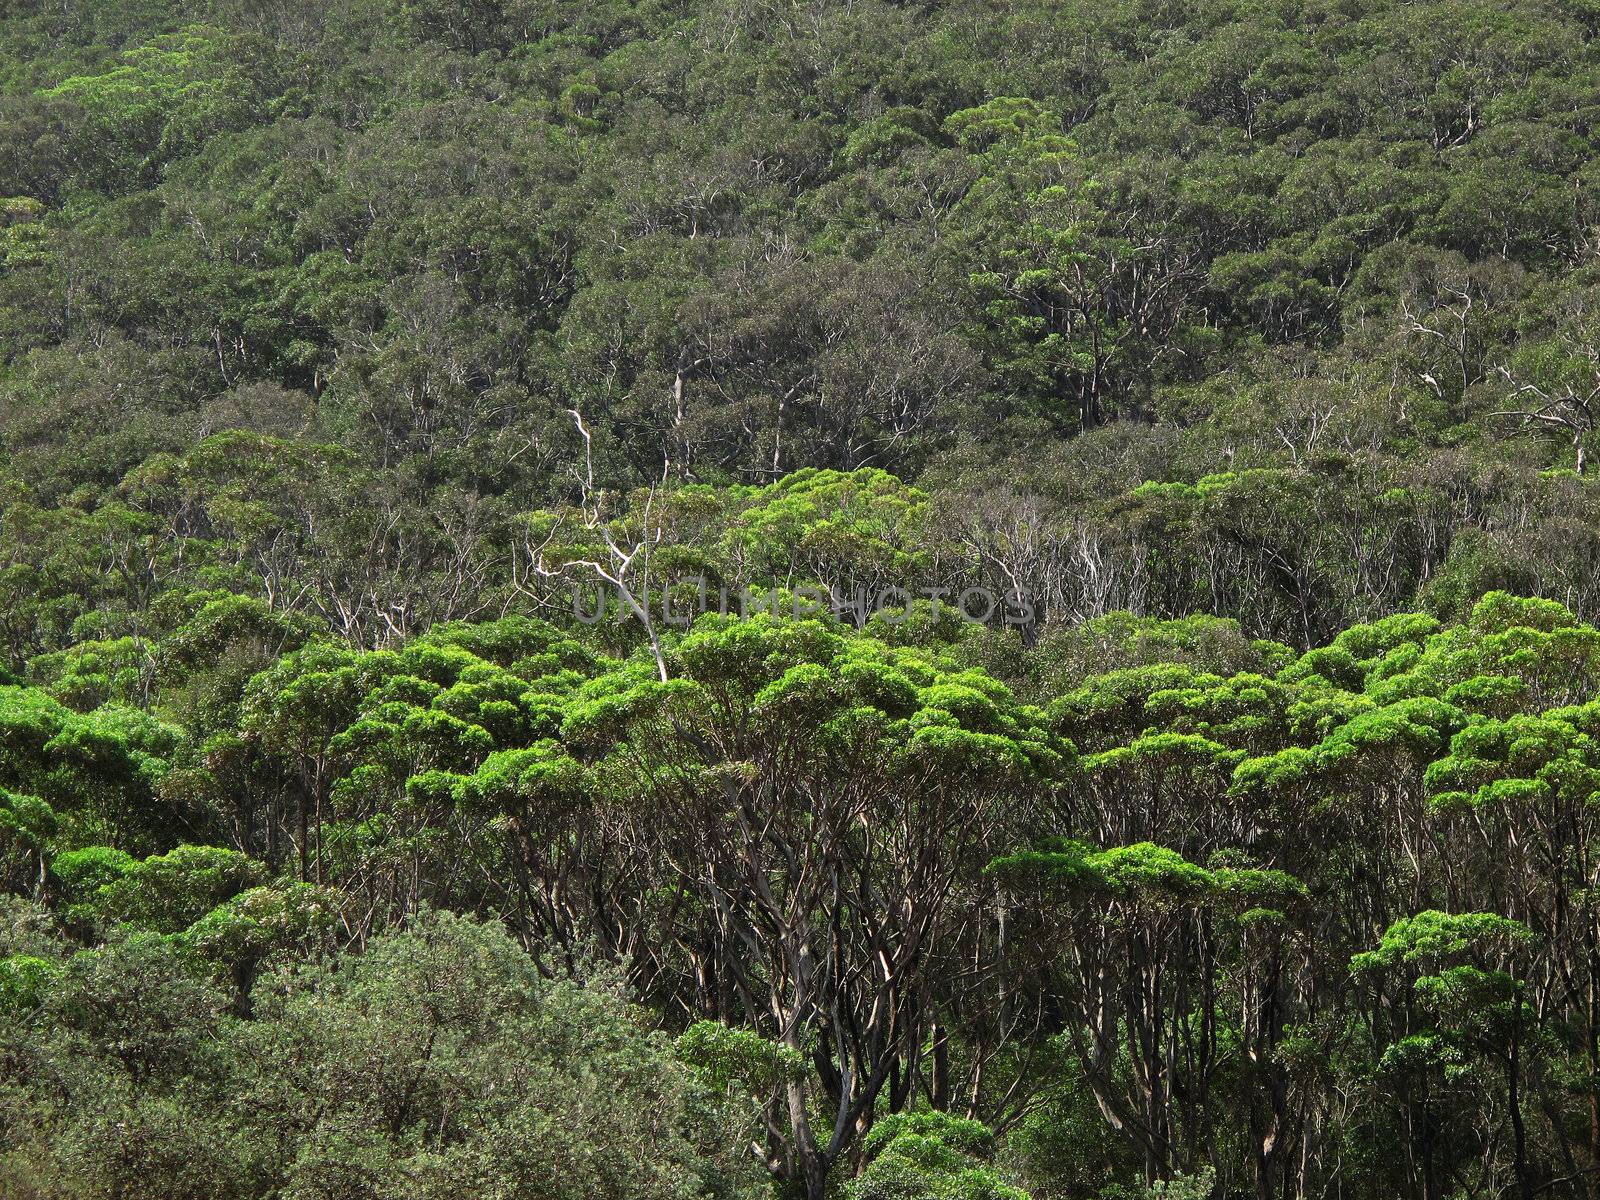 Coastal eucalyptus forest with bright green trees in front of dark green trees australia